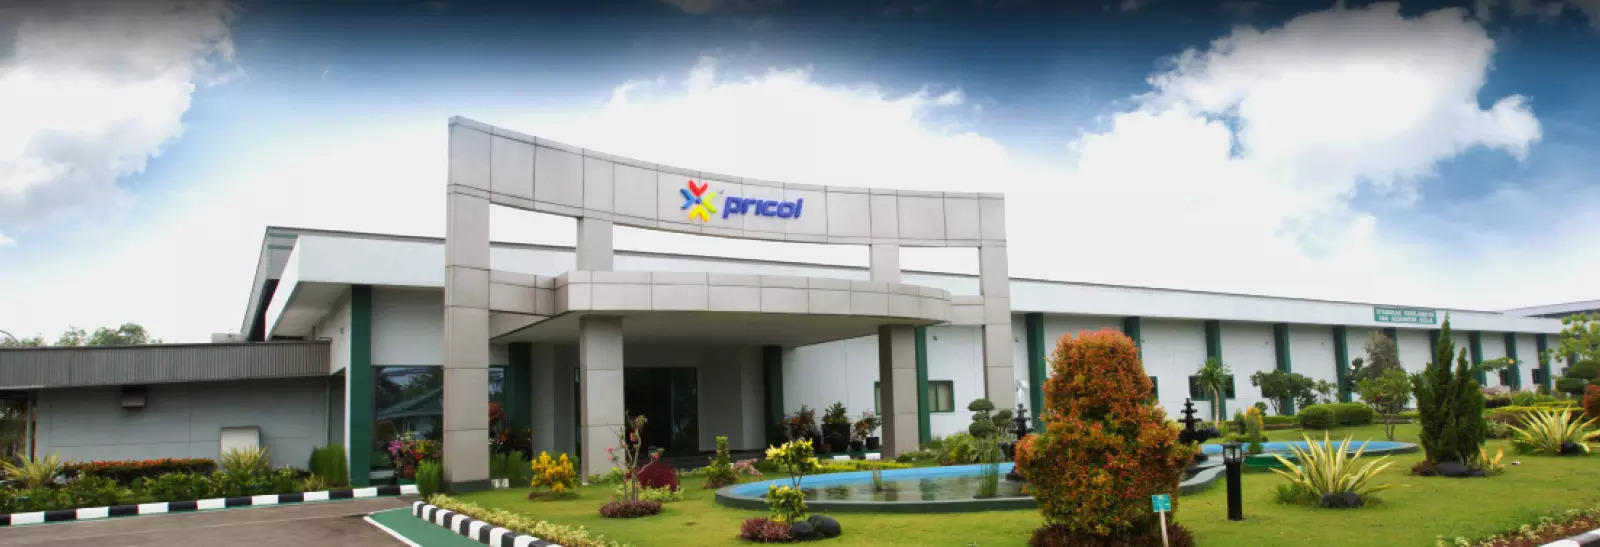  Pricol commenced its operations in 1975 in Coimbatore is a manufacturer of automotive instruments.